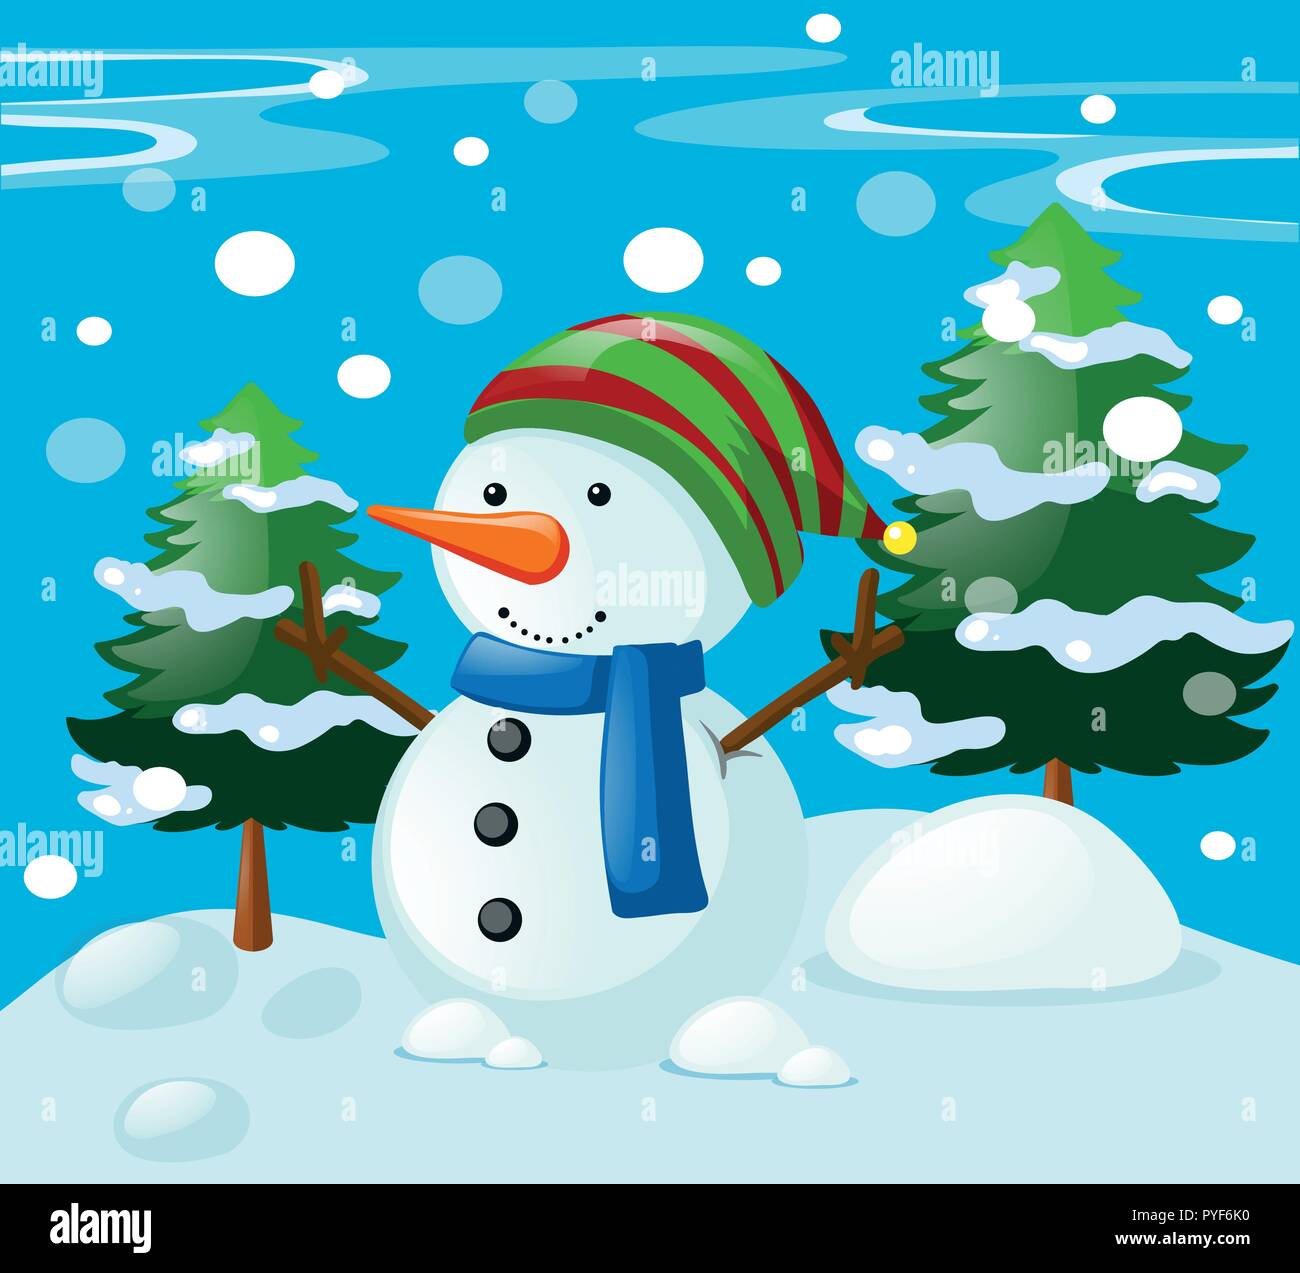 Winter Scene With Snowman In The Field Illustration Stock Vector Image Art Alamy